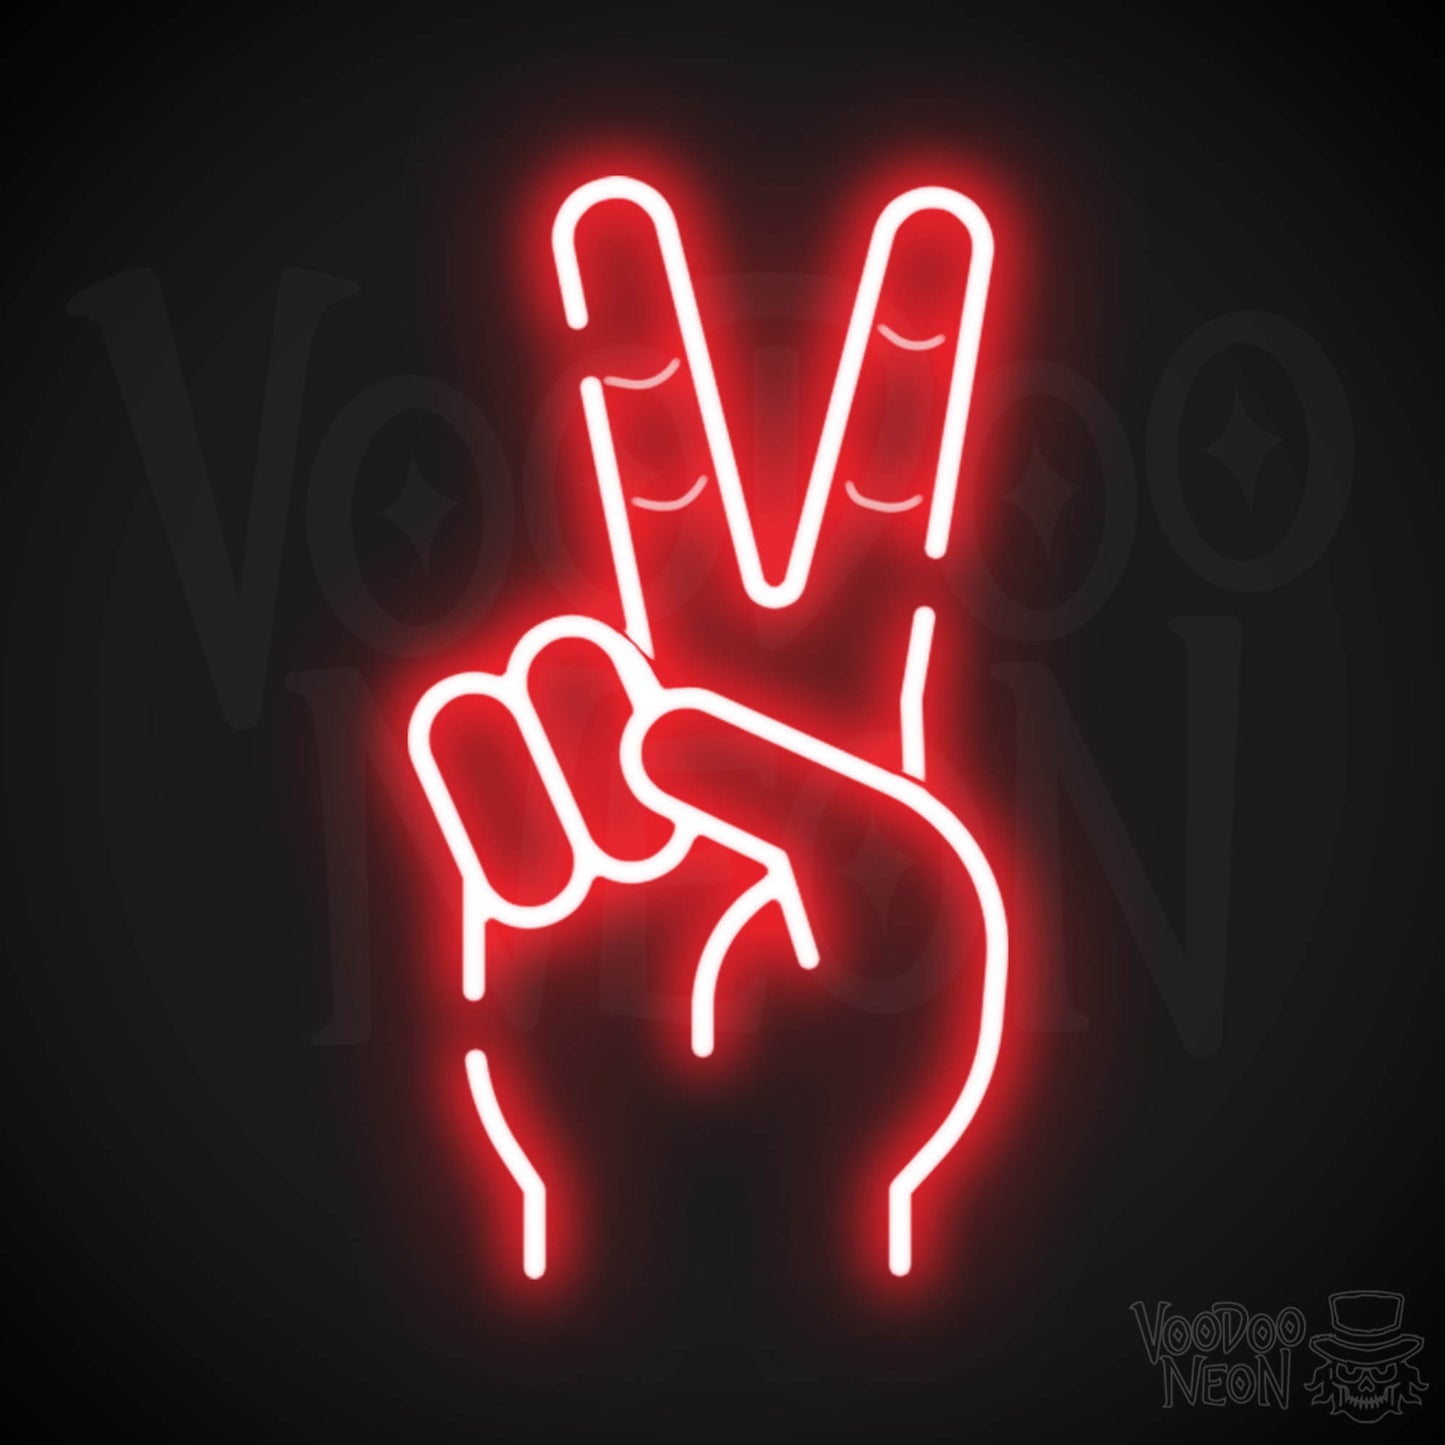 Neon Peace Sign - Peace Symbol Neon Wall Art - Color Red